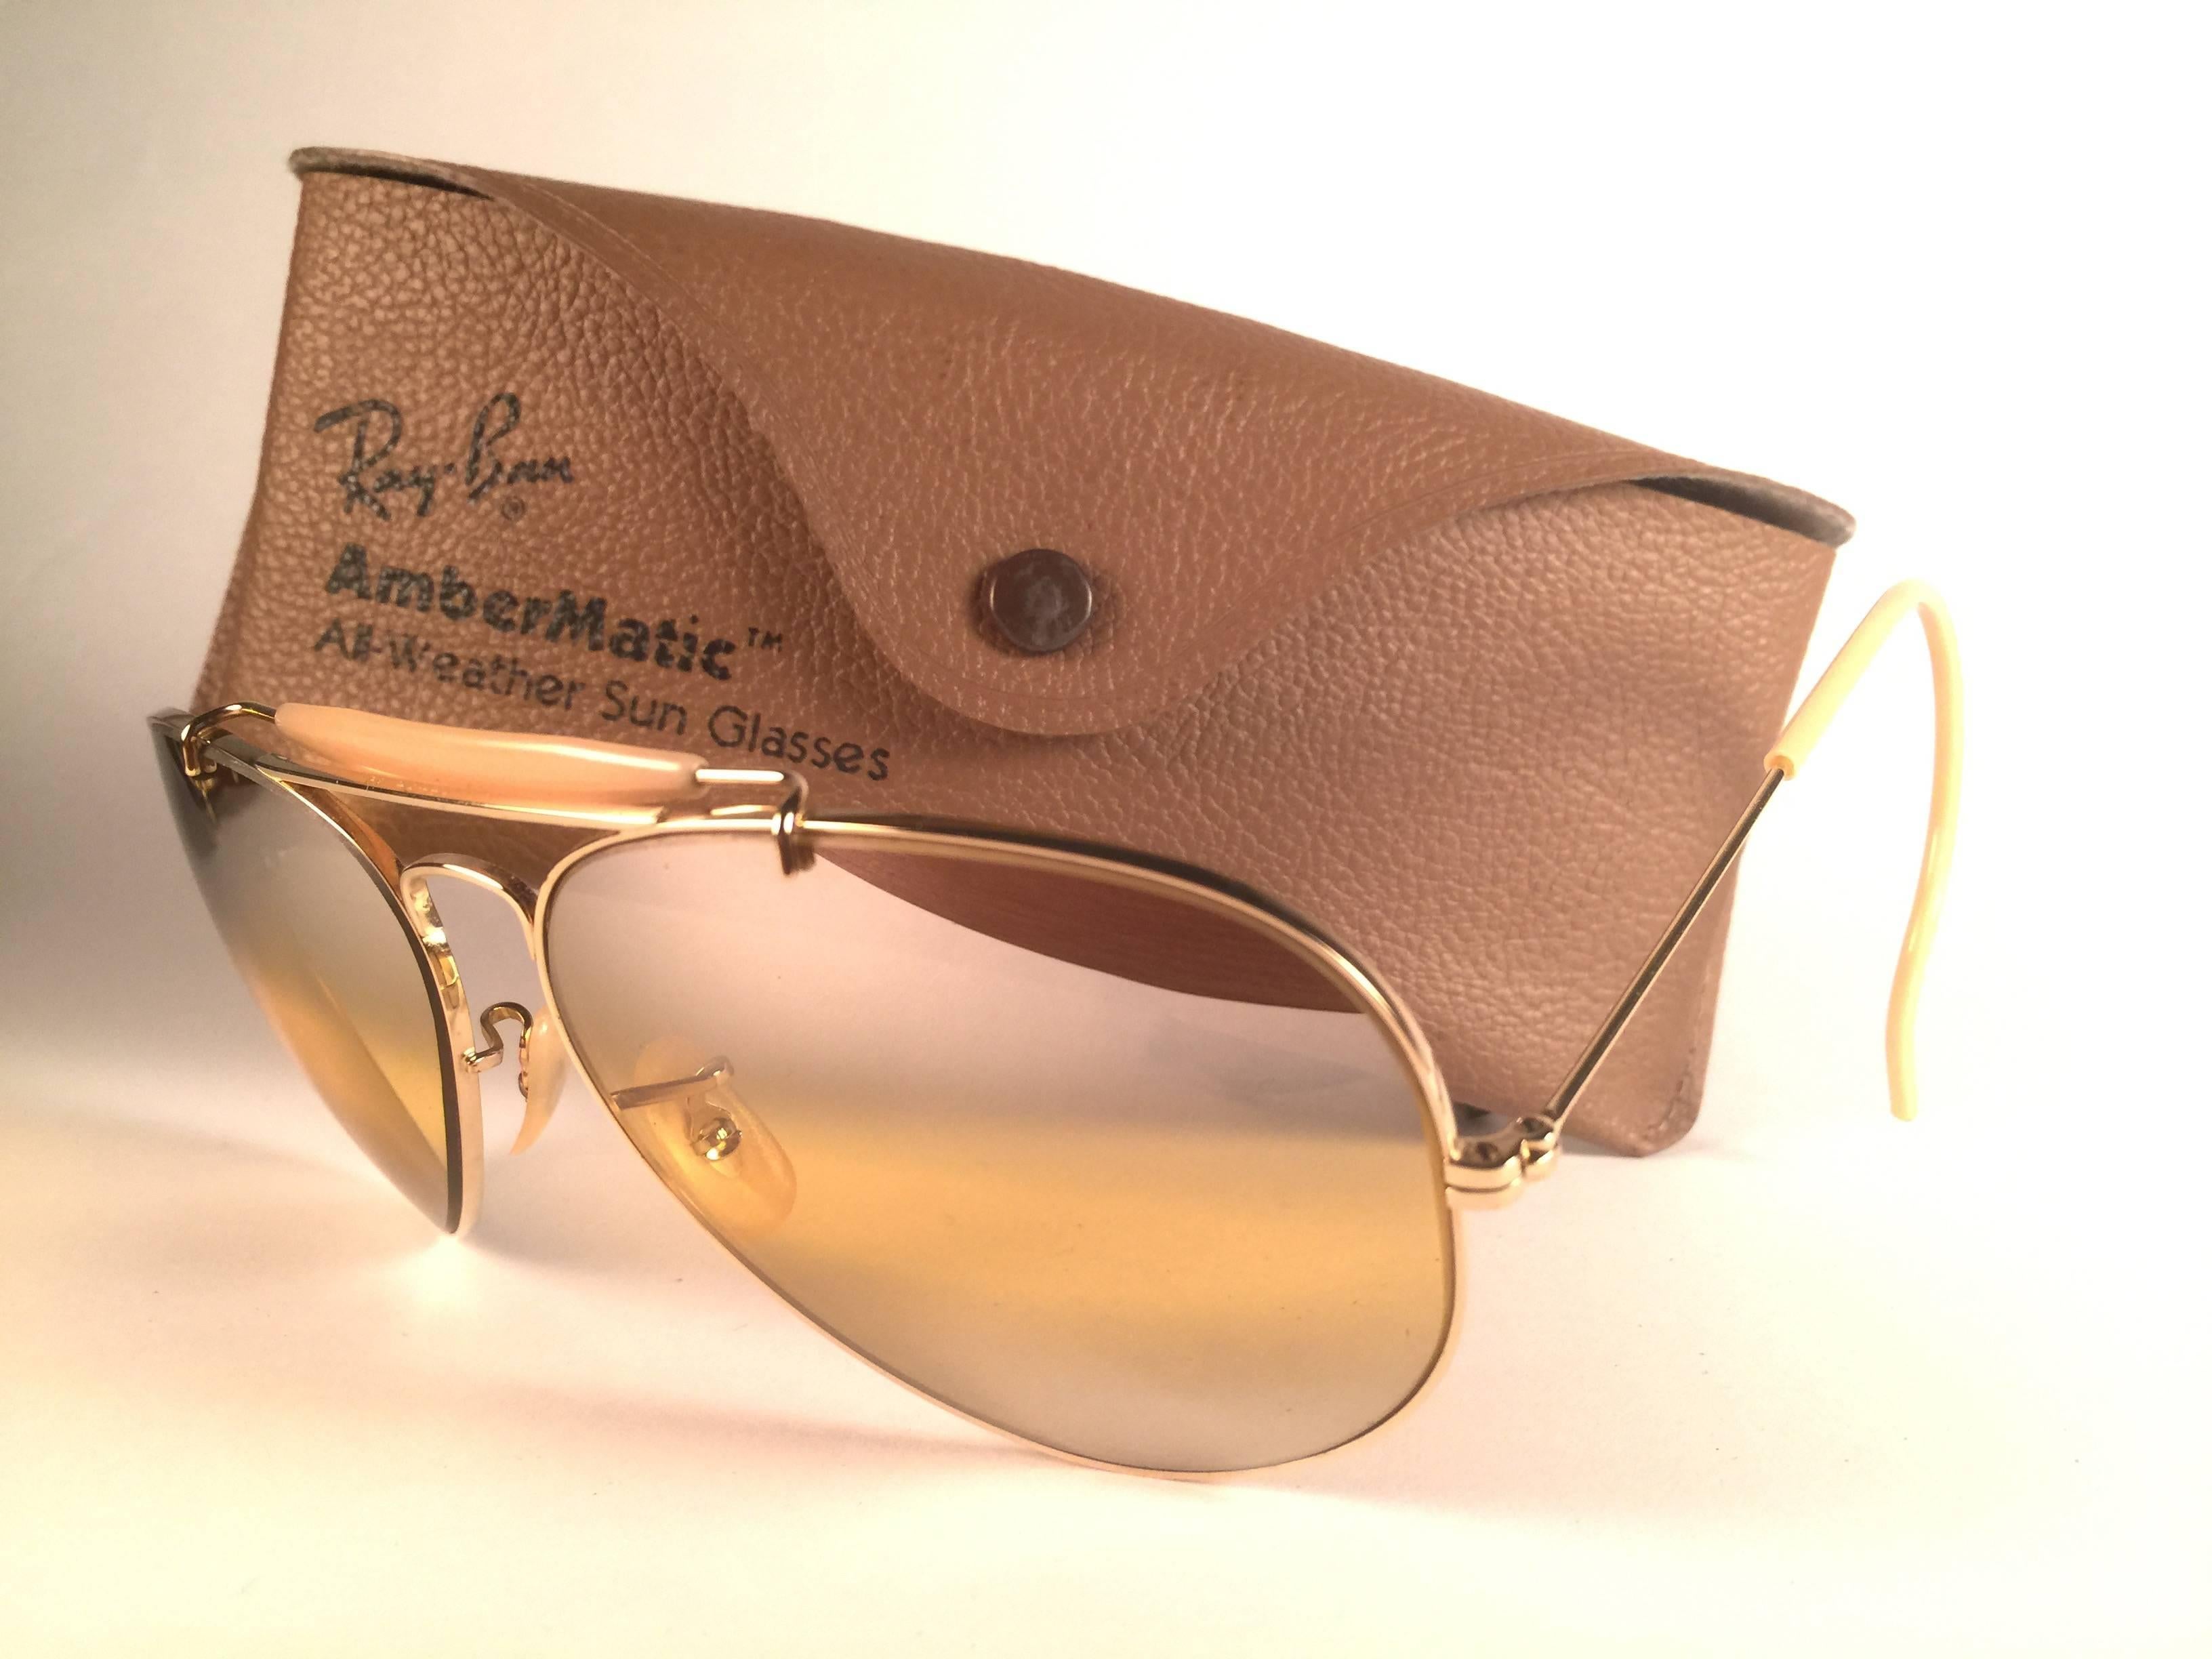 Neue Vintage Ray Ban Aviator Gold Ambermatic Double Mirror 1970's B&L Sonnenbrille (Braun)